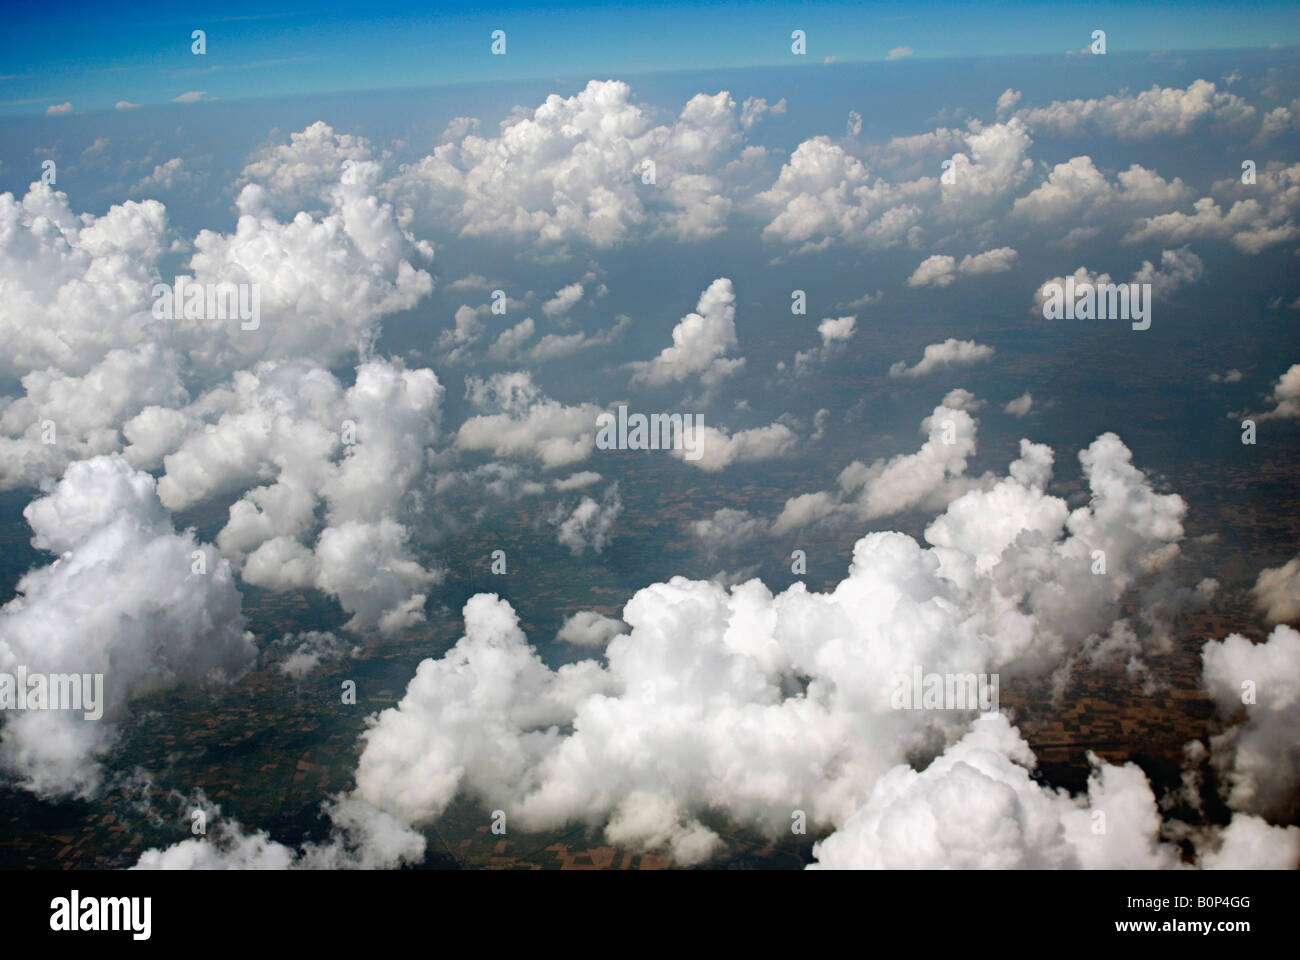 Mixture of Cumulus Clouds and Cirrus Clouds. Stock Photo